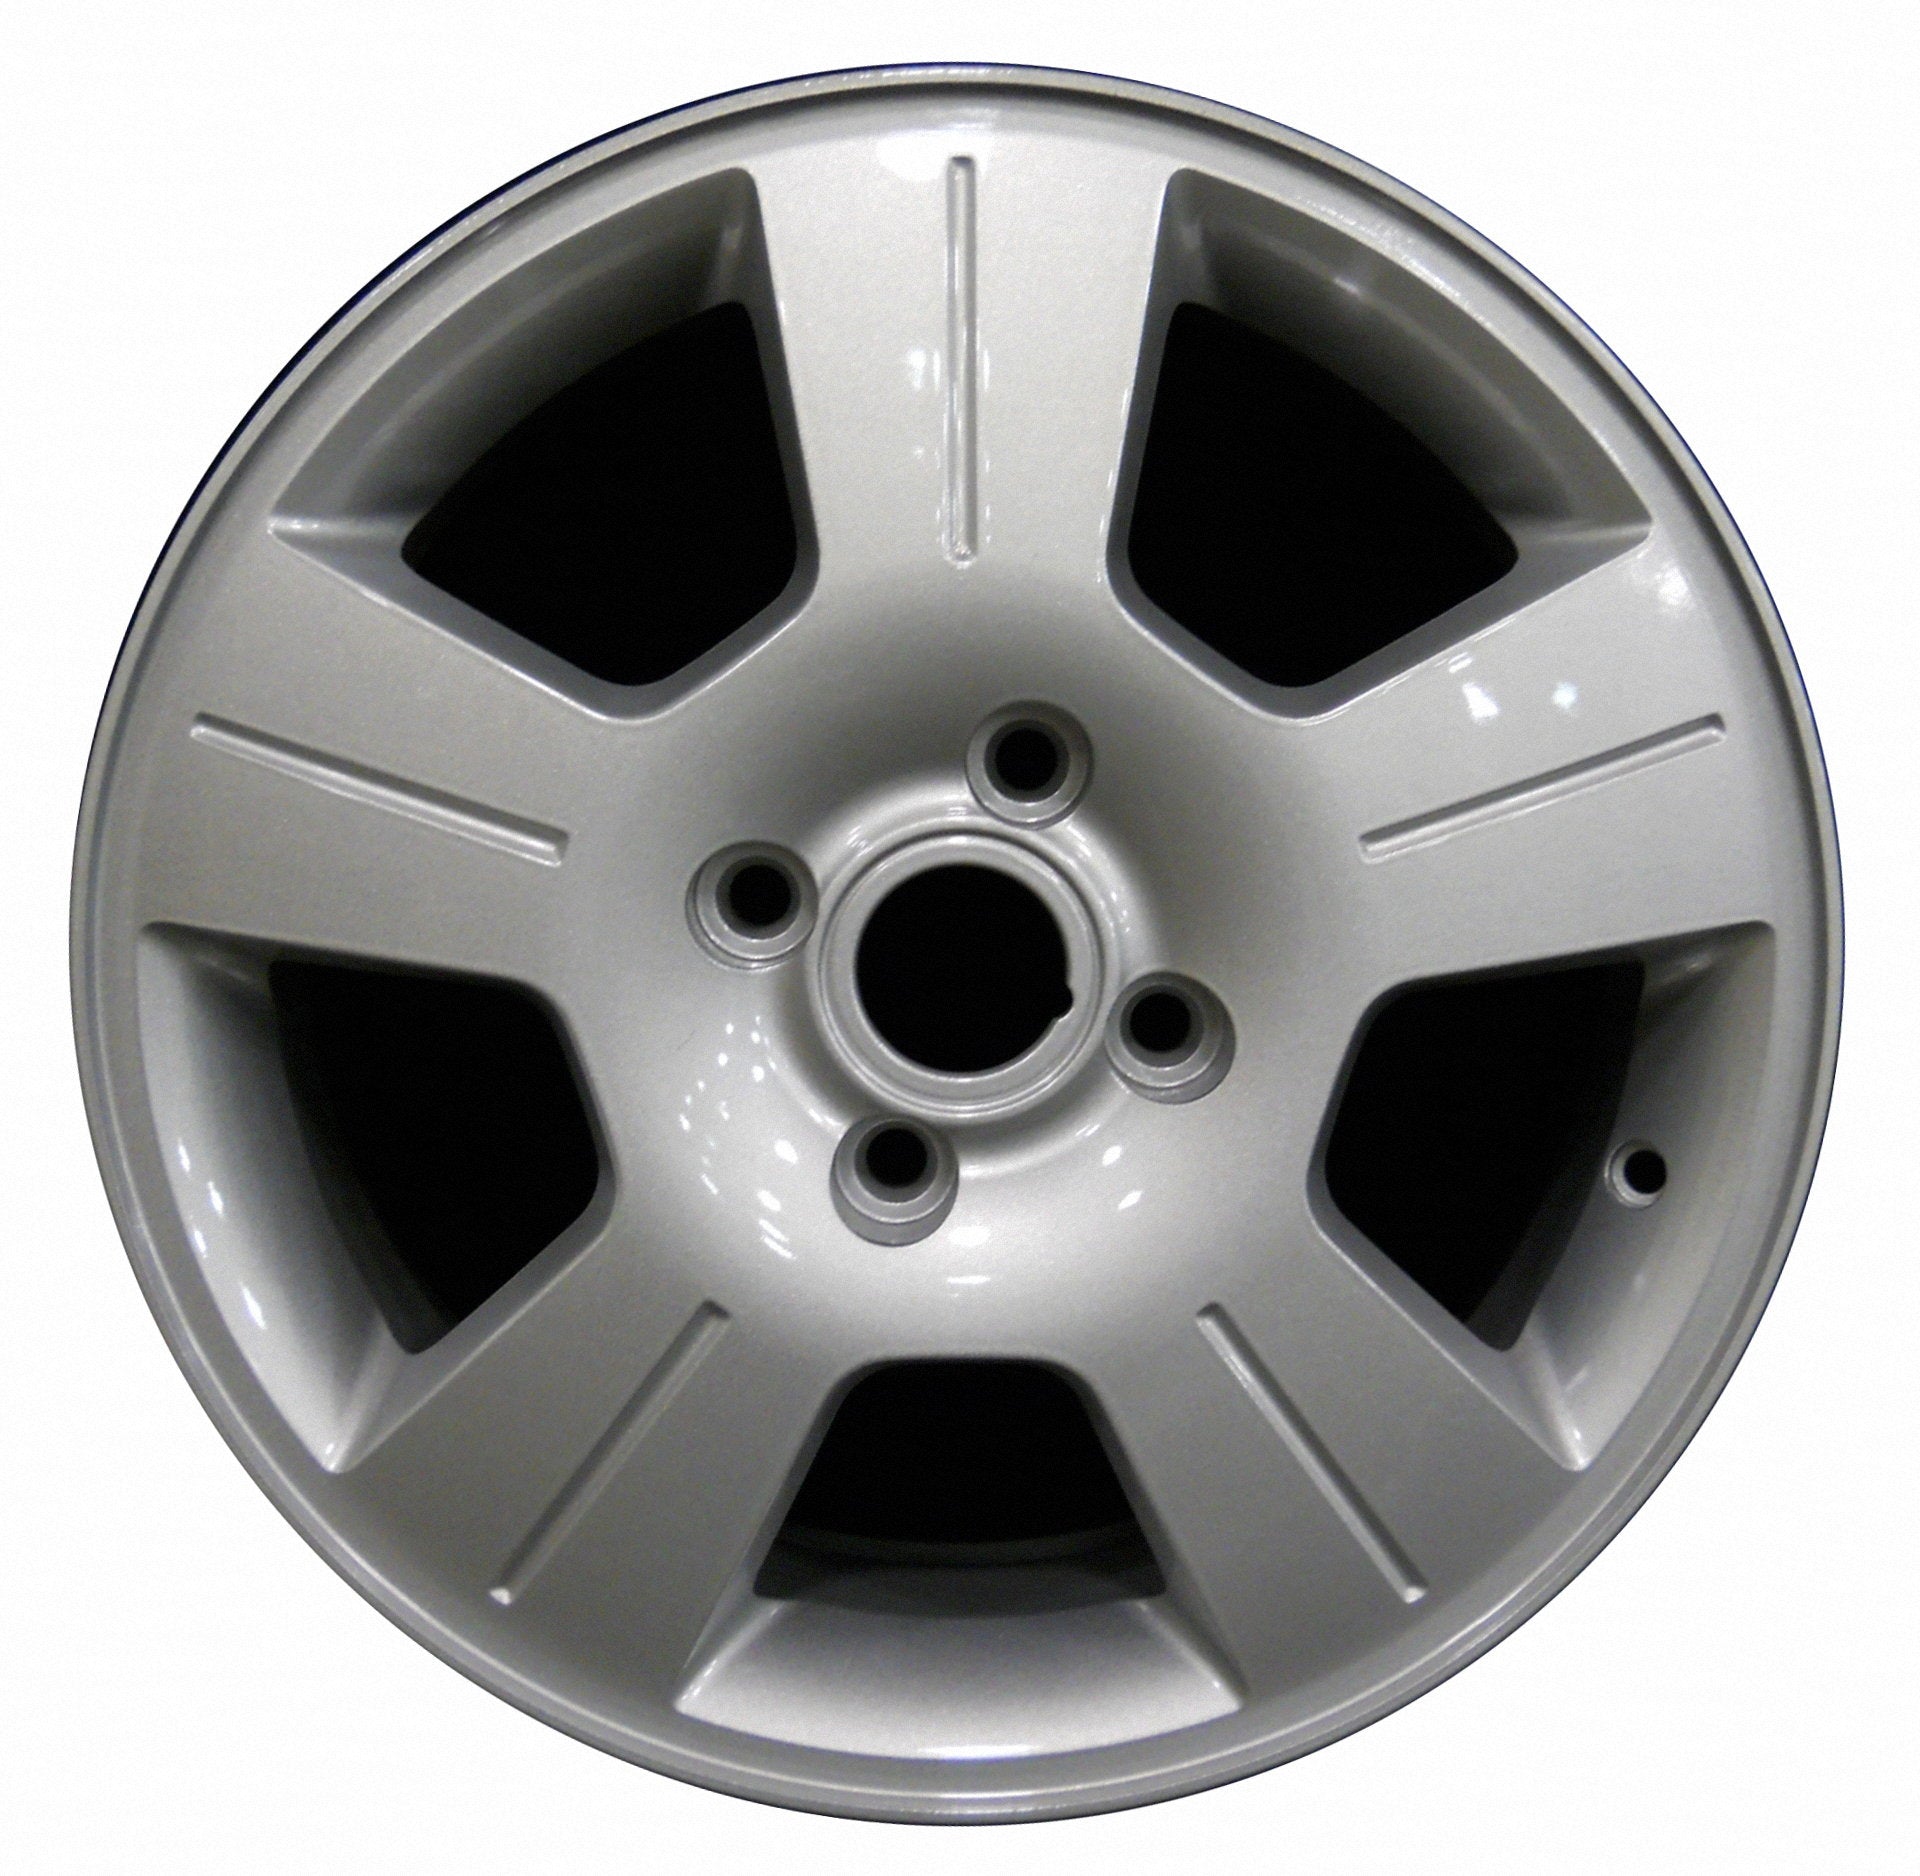 Ford Focus  2003, 2004, 2005, 2006, 2007 Factory OEM Car Wheel Size 16x6 Alloy WAO.3530.PS02.FF